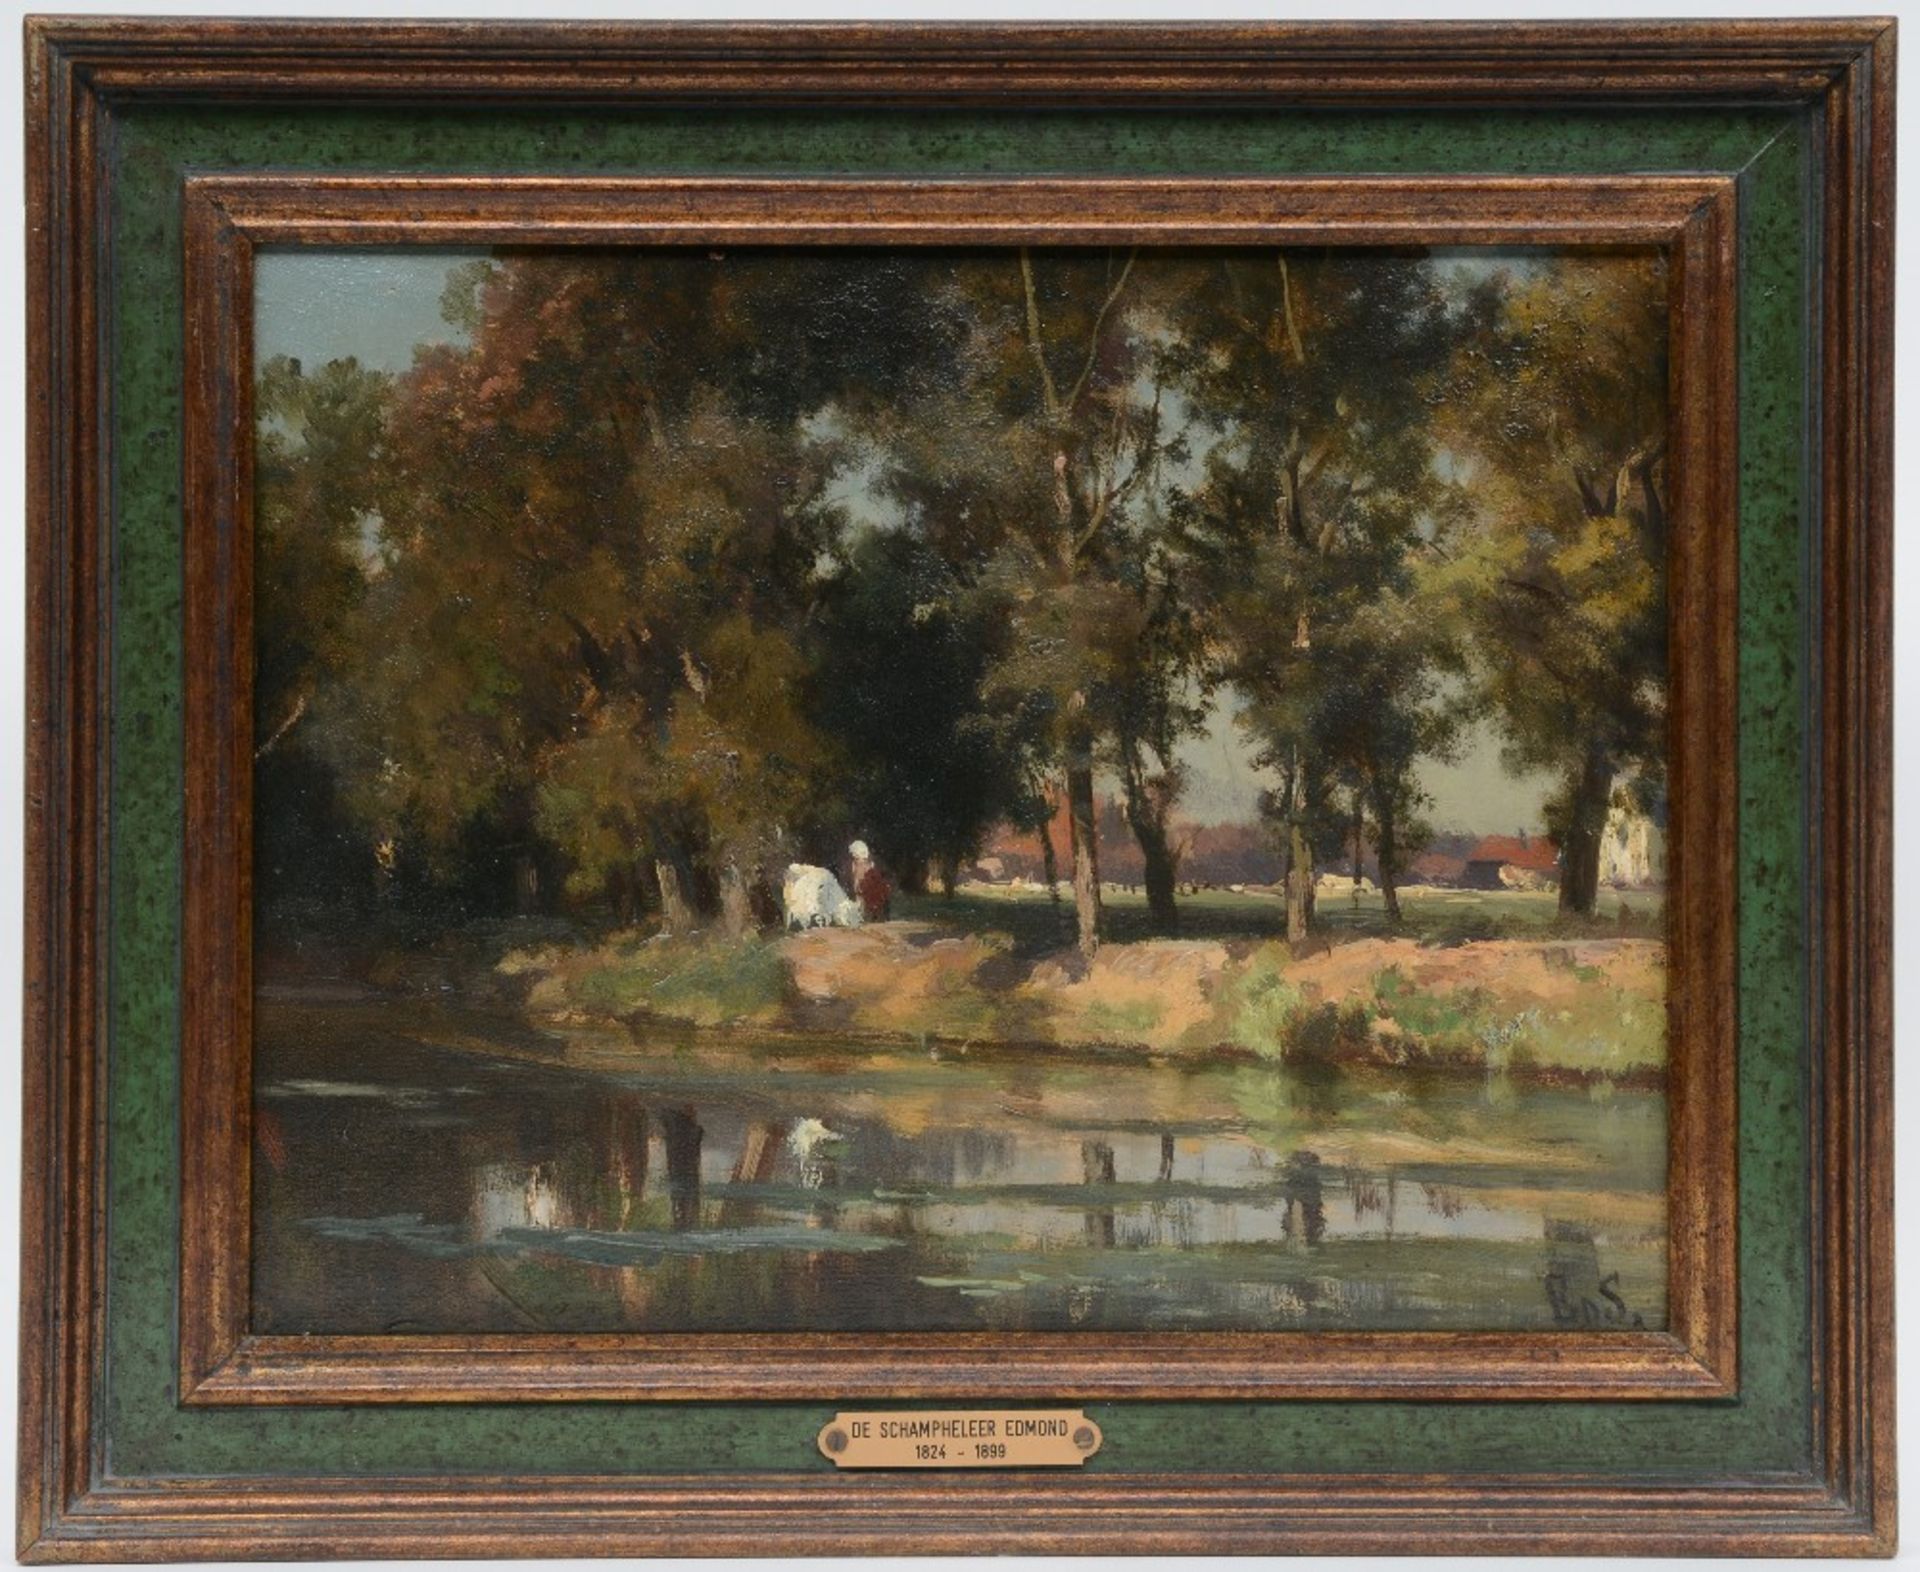 Monogrammed E.D.S. (De Schampheleer E.), rural view with a cowherd, oil on canvas on panel, signed - Image 3 of 12